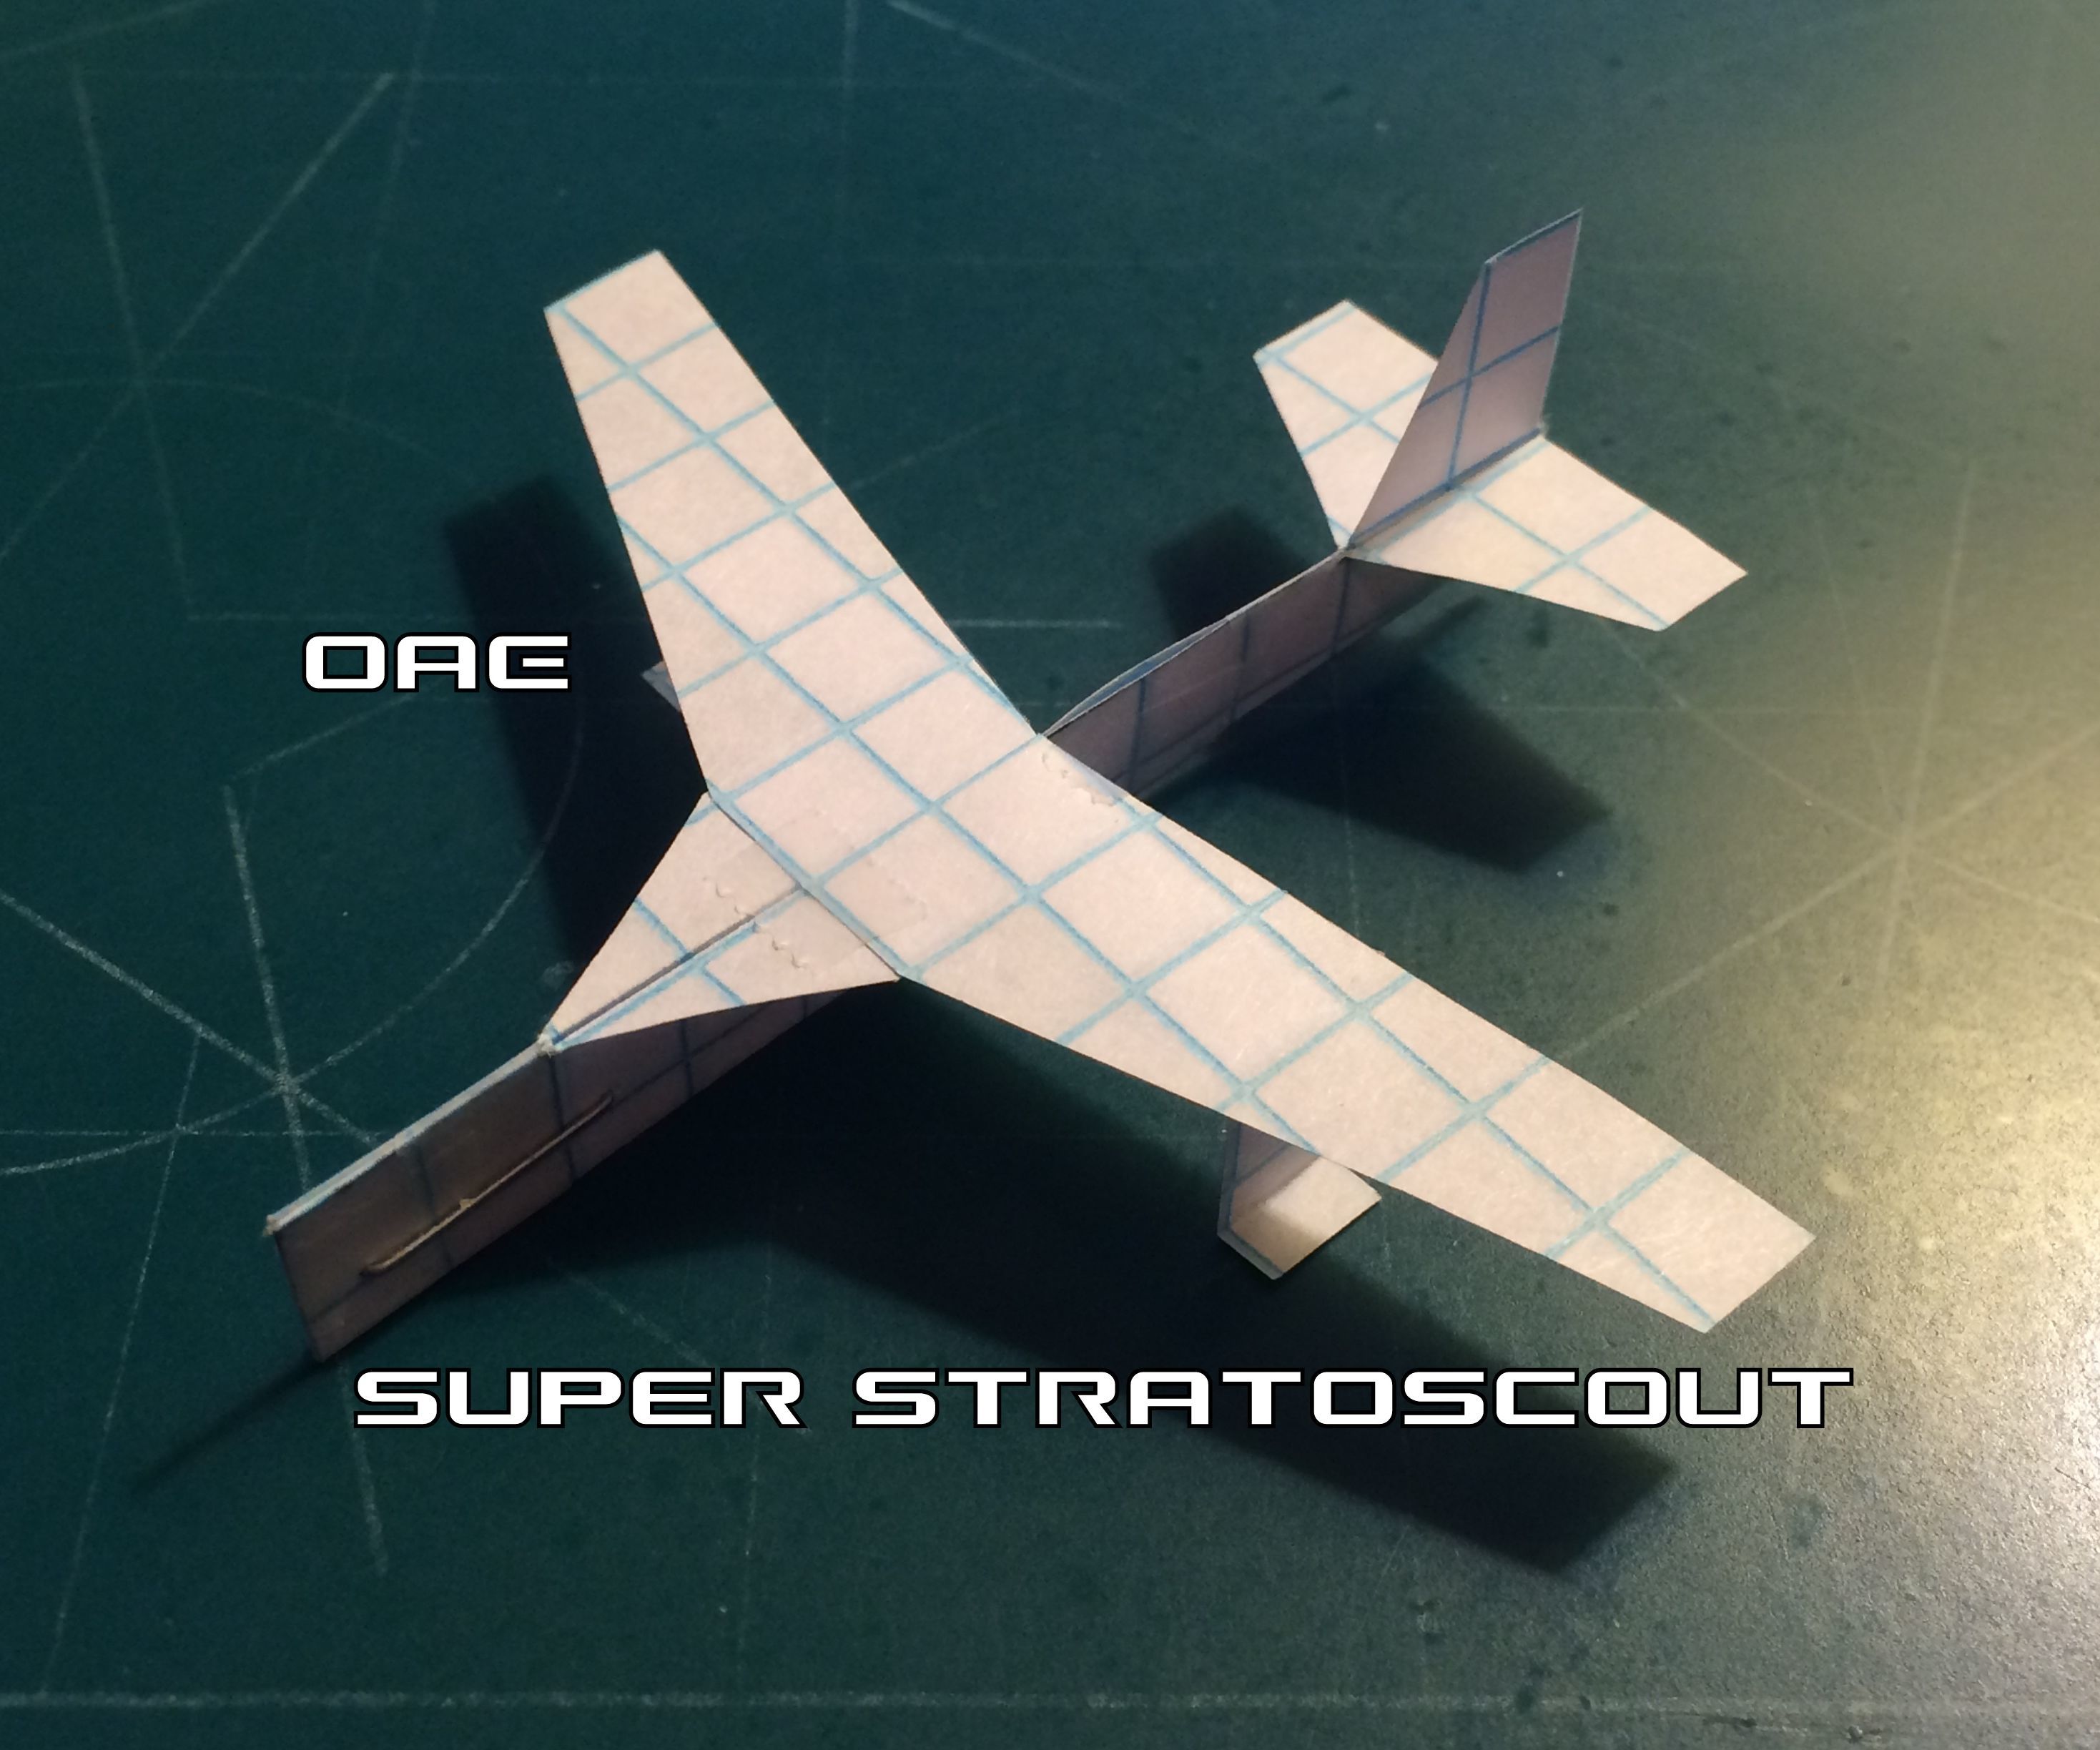 How To Make The Super StratoScout Paper Airplane